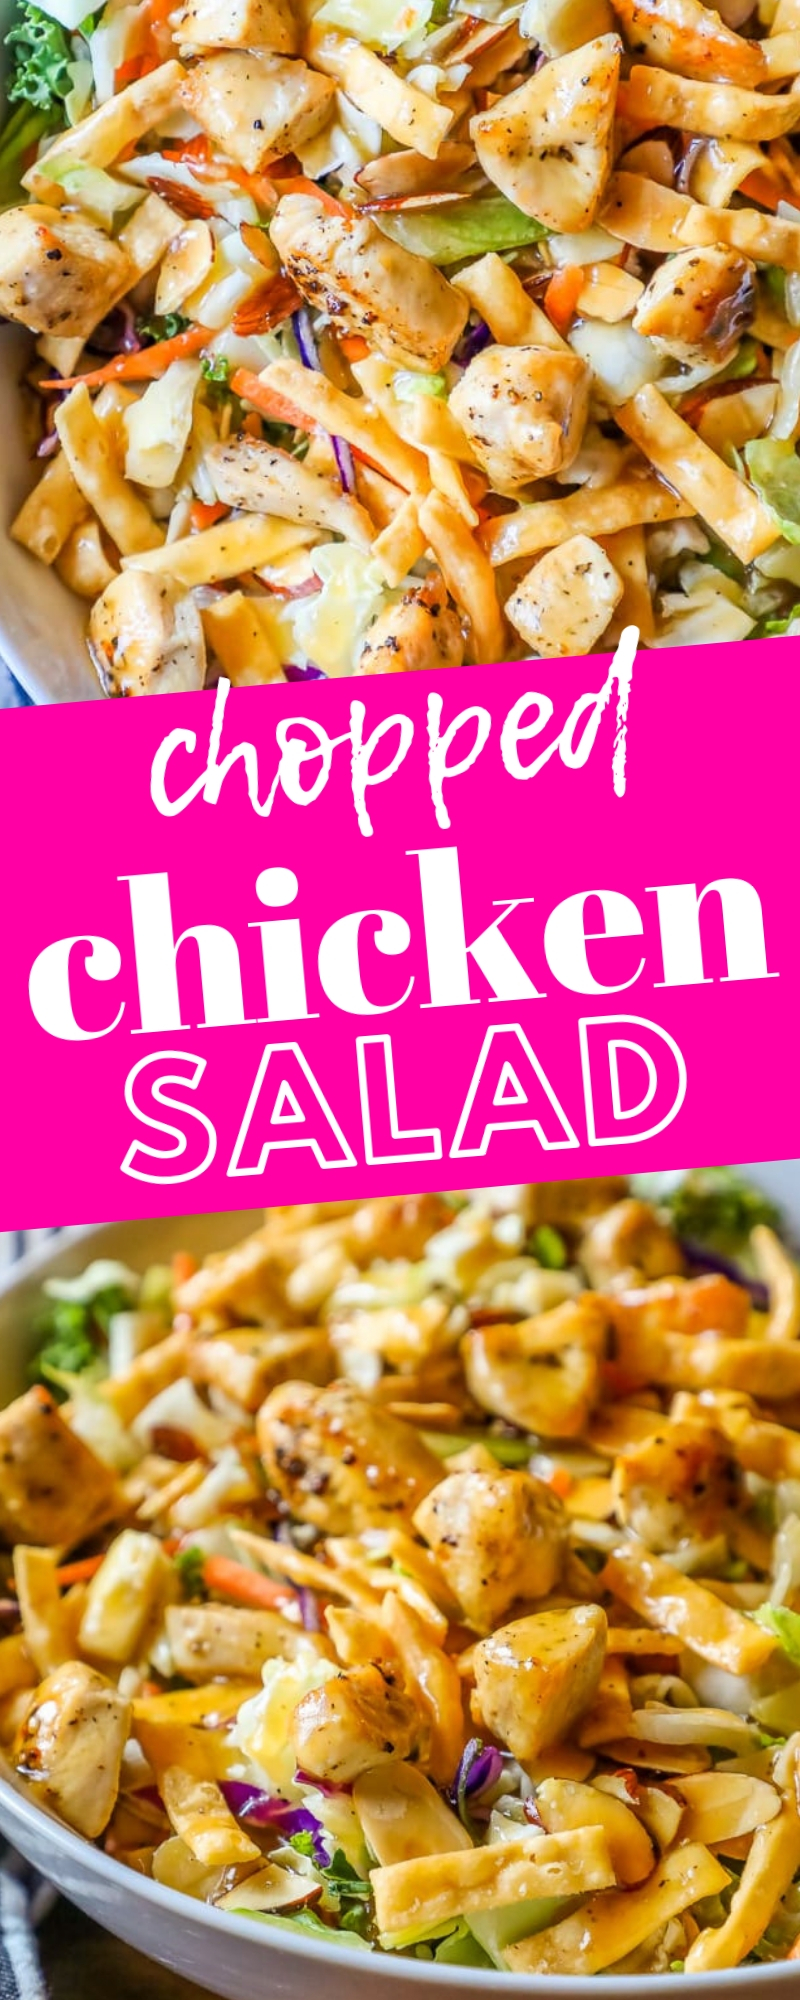 delicious chicken Asian salad in a white bowl with a striped towel in the background with a pink textbox with recipe name 